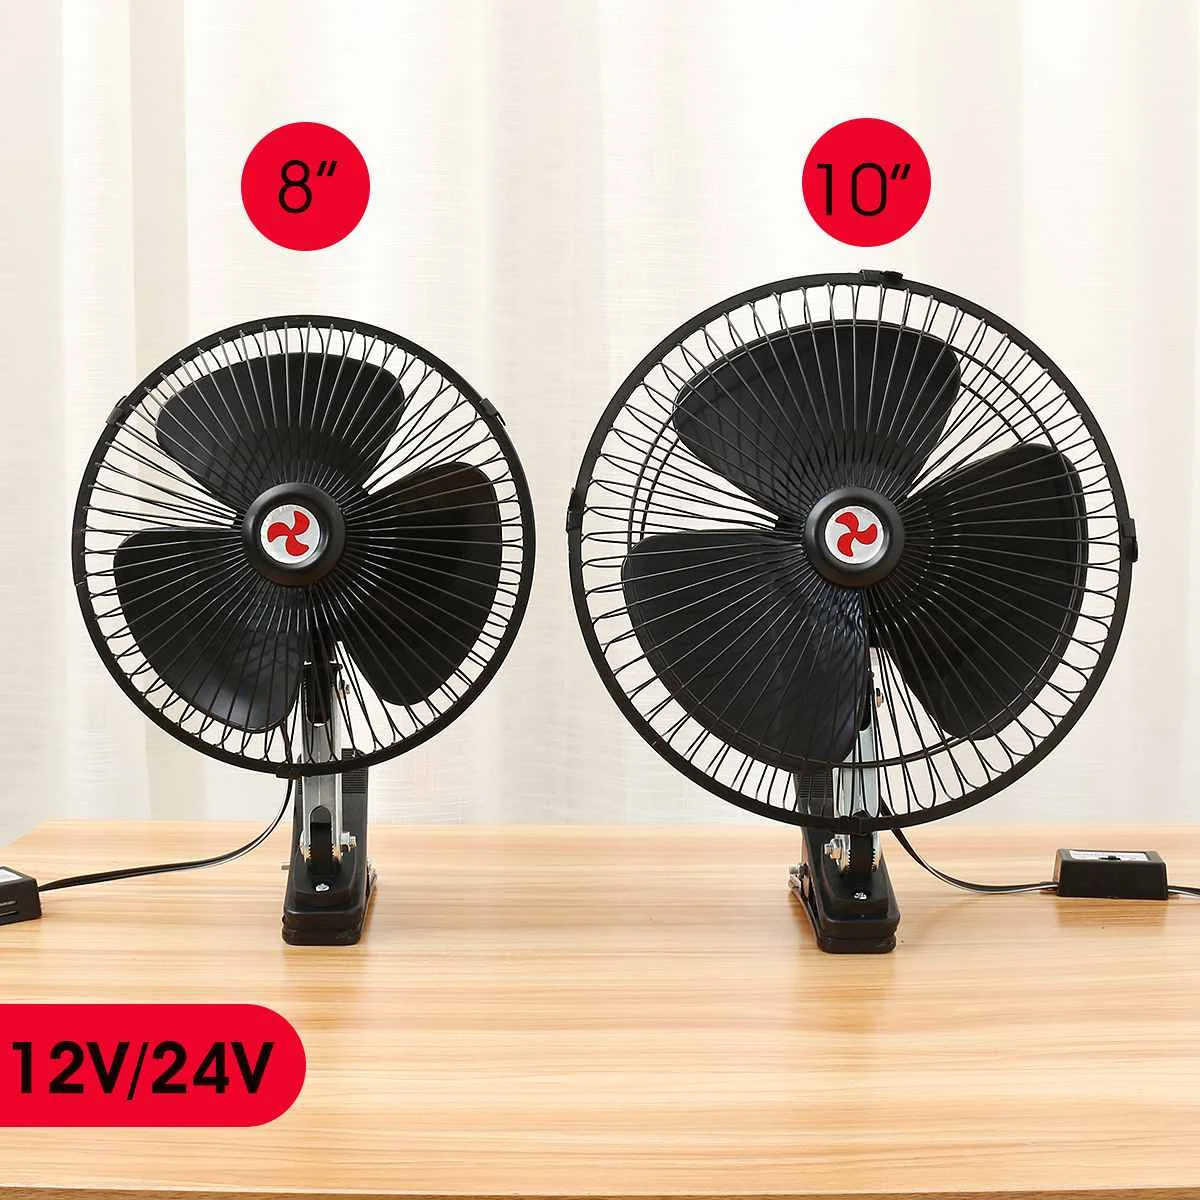 12V/24V 8"/10" Car Fan Cooling Airflow Clip-on All-Round Adjustable Electric Fans Low Noise Air Cooler For Auto Home Truck